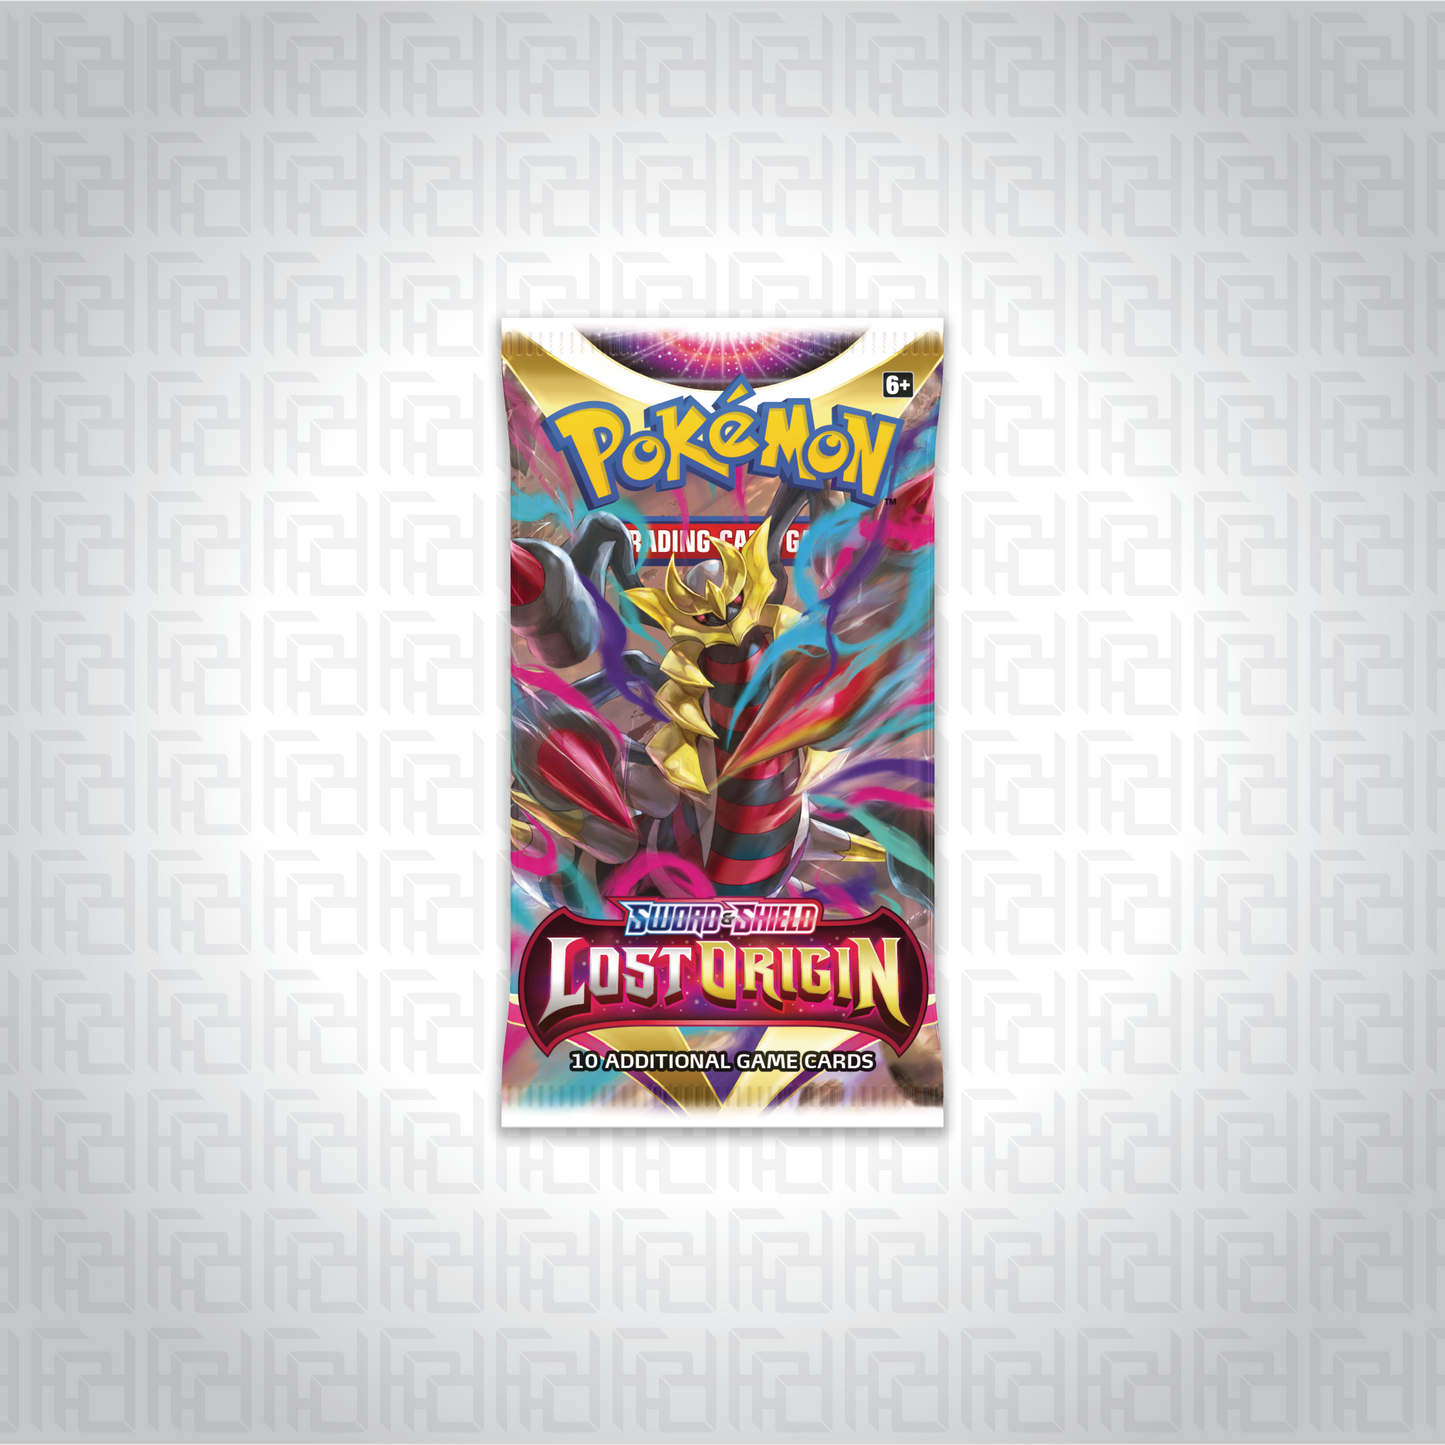 Pokemon Trading Card Game booster pack of Sword & Shield—Lost Origin expansion.